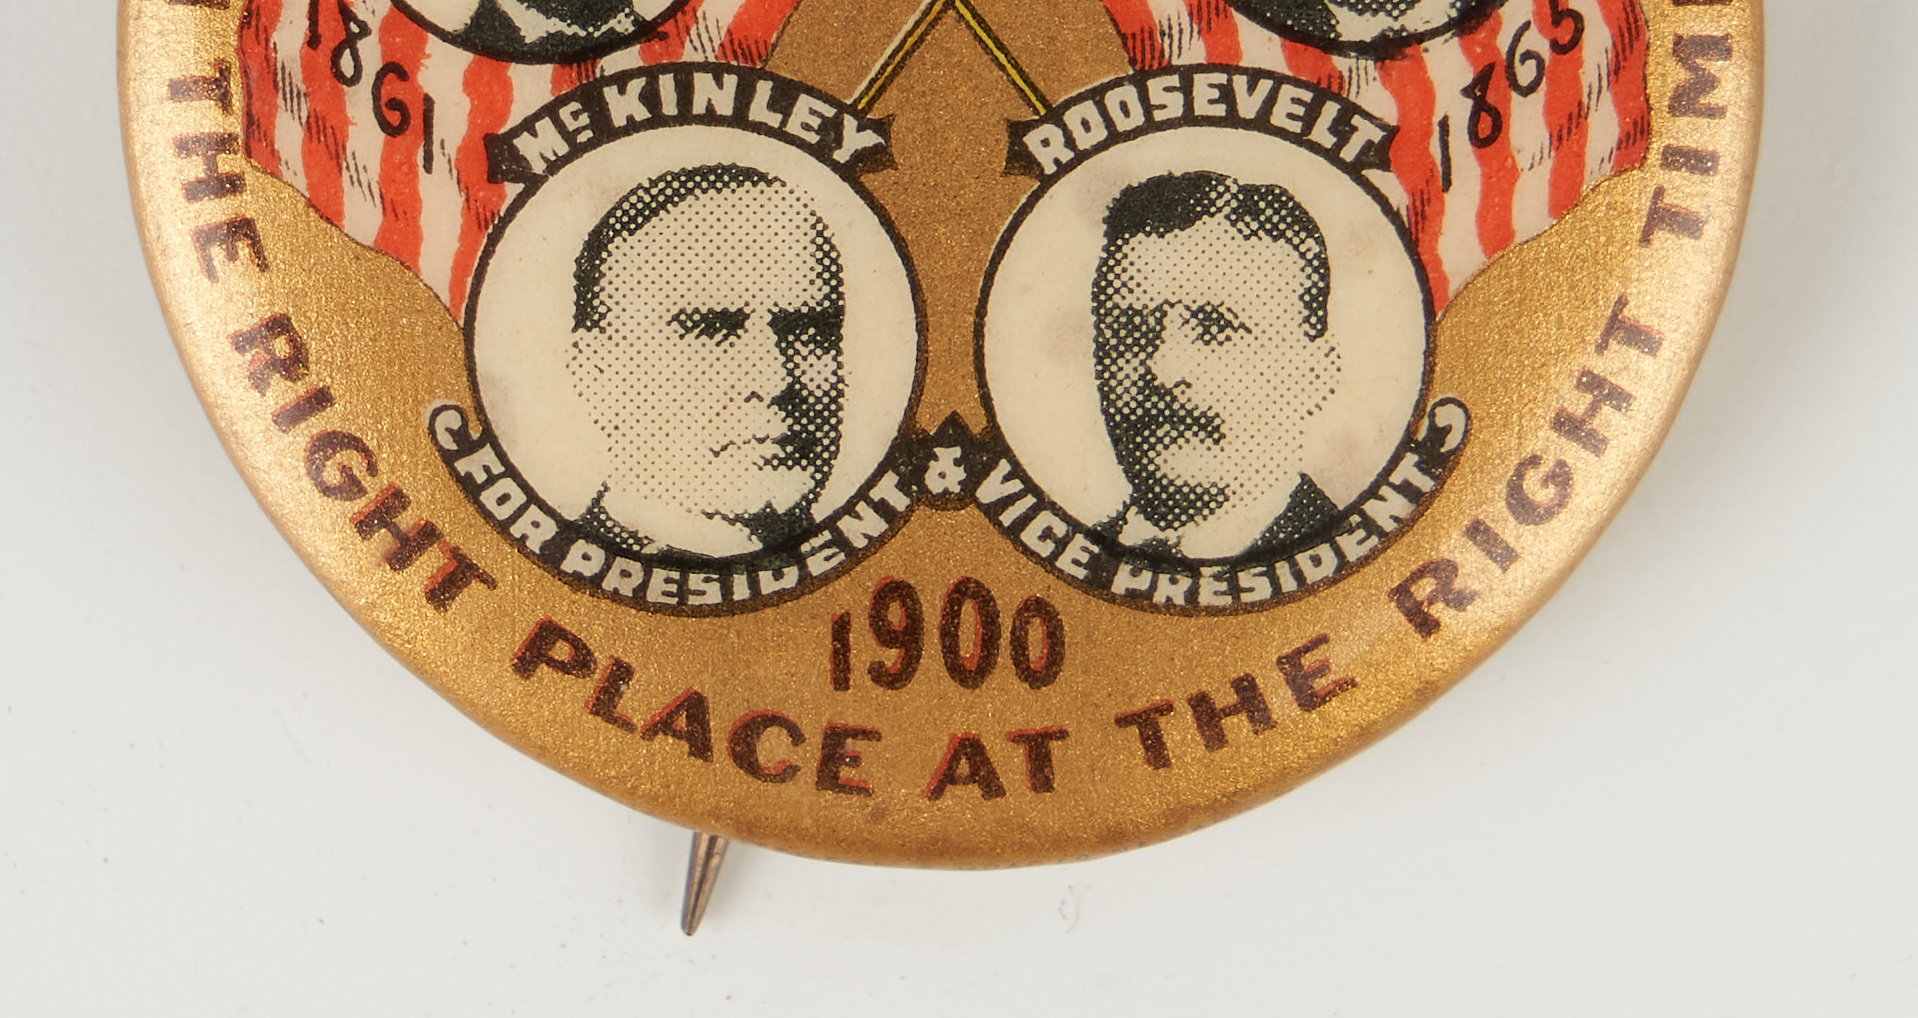 Lot 681: Group of Political Items, incl. The Right Men button, 1900